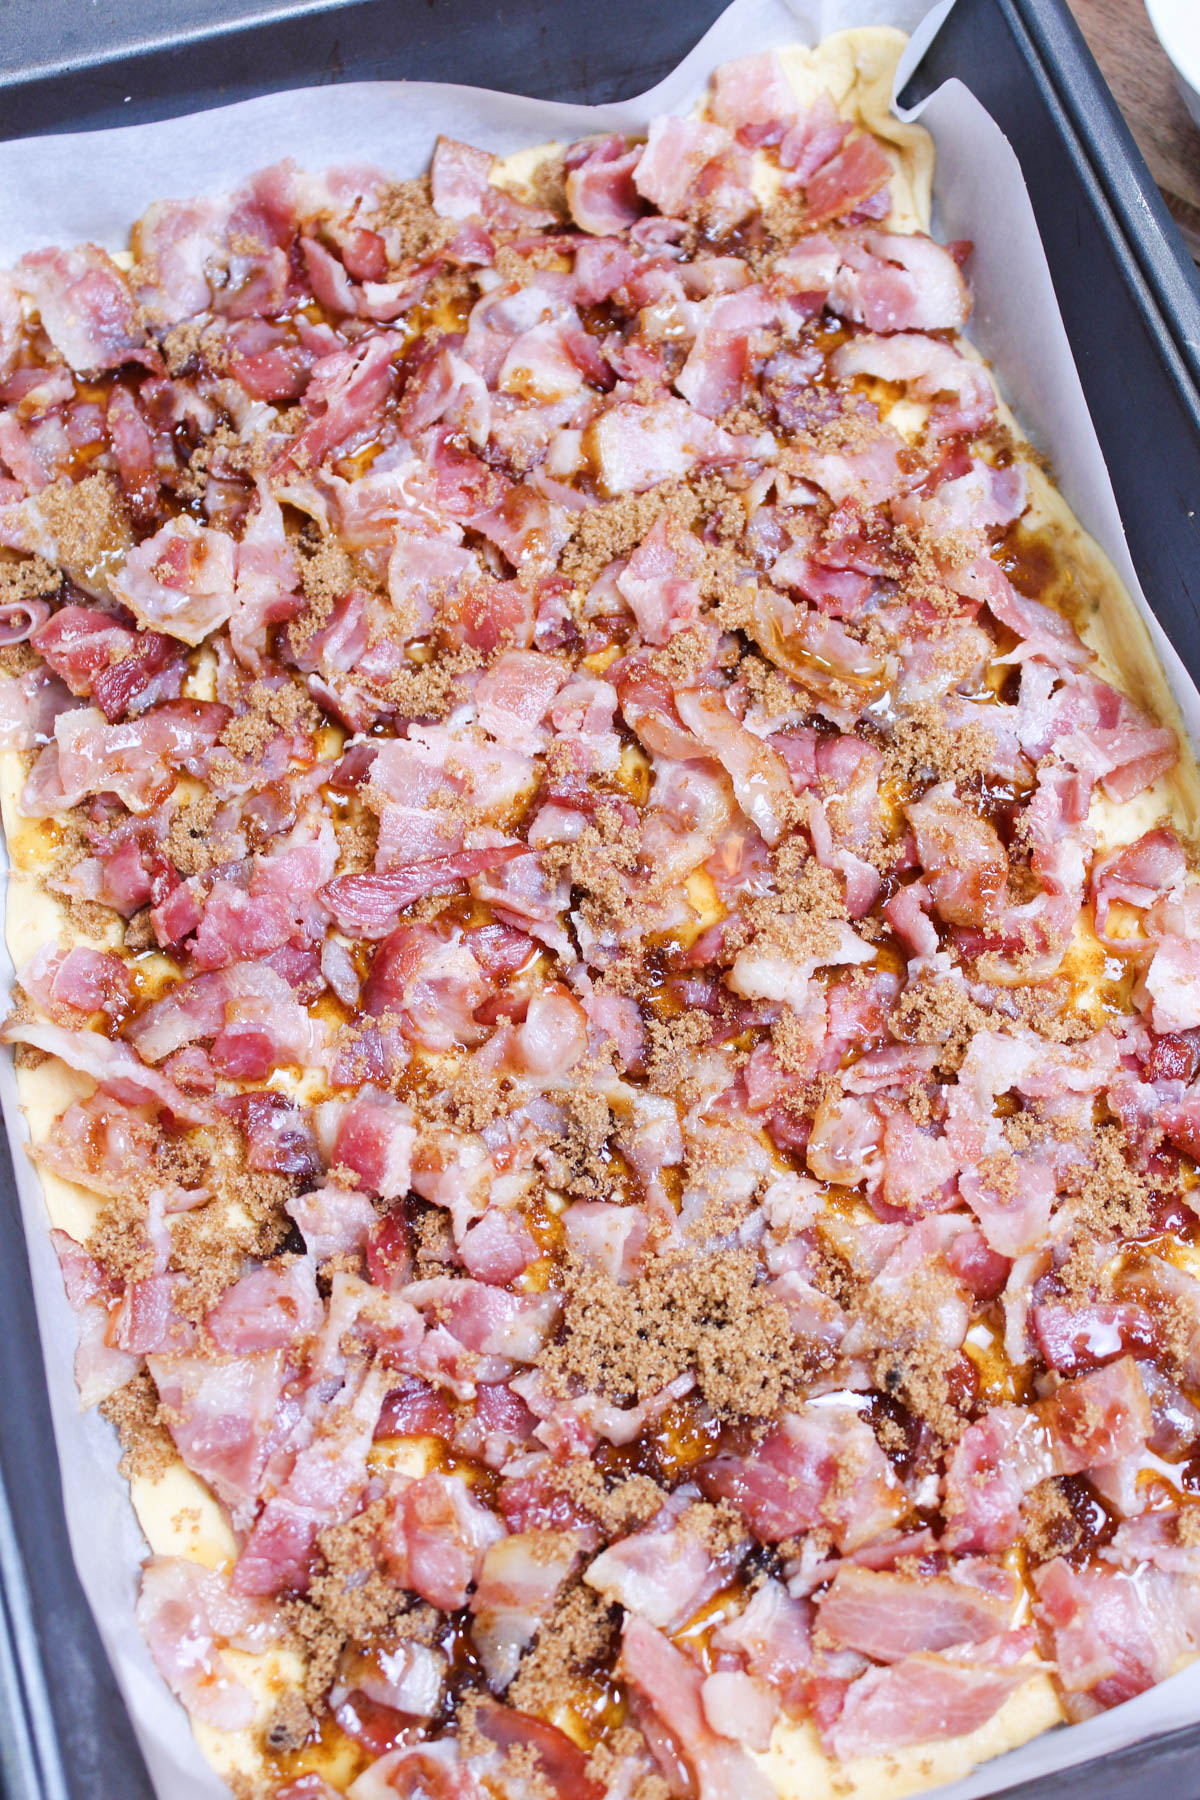 A pizza with bacon and cheese in a pan on a table.